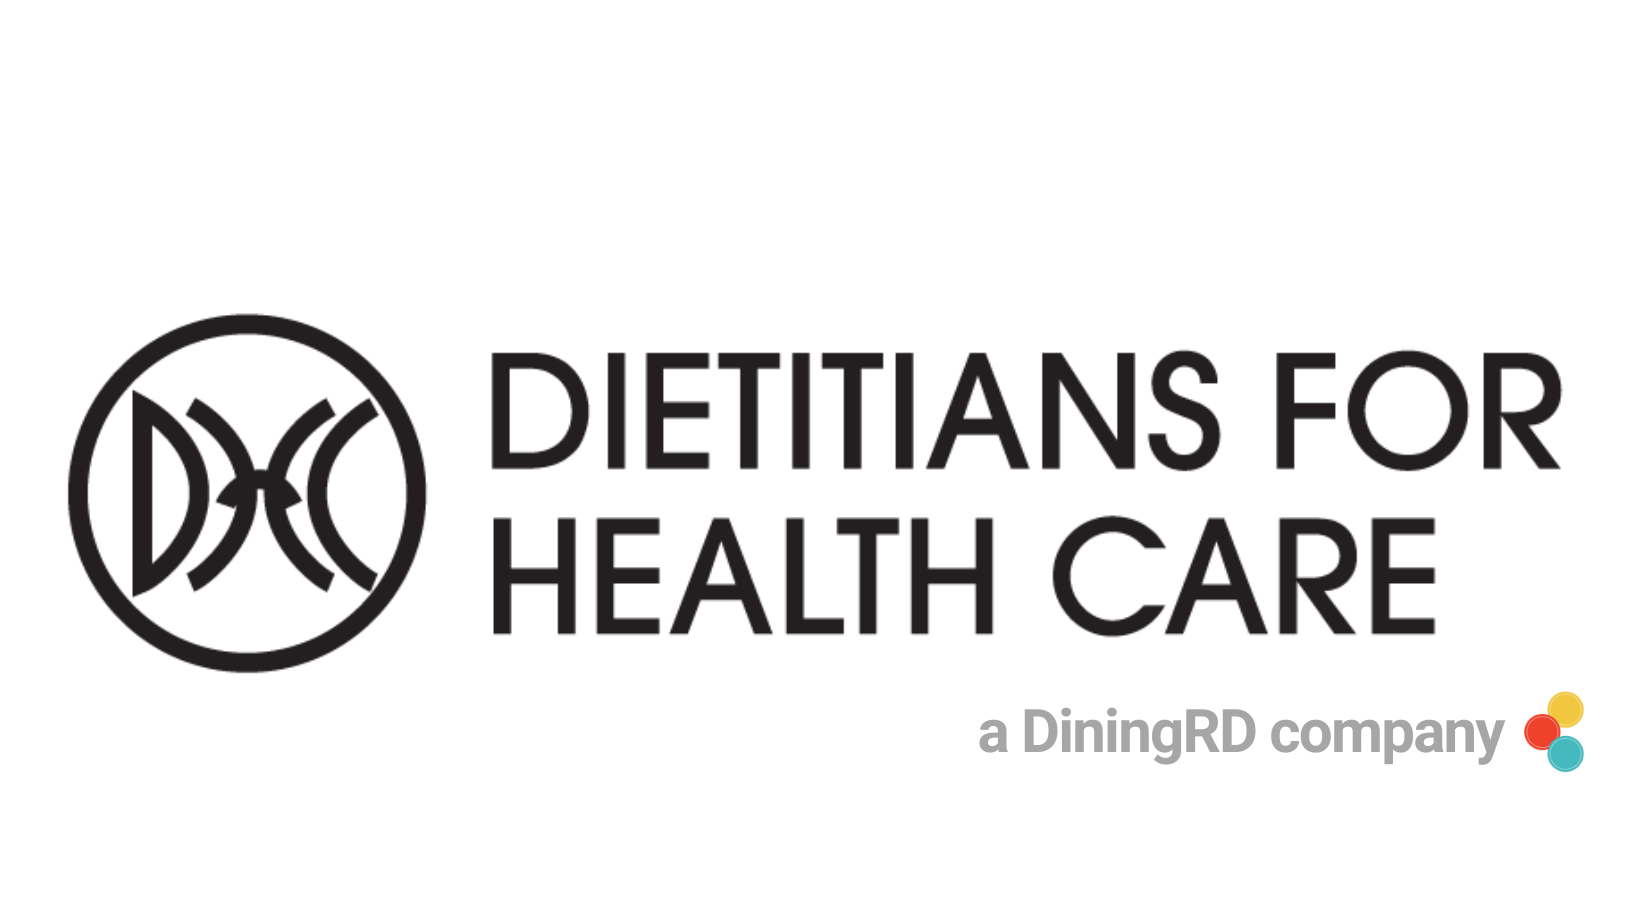 dietitians for health care logo